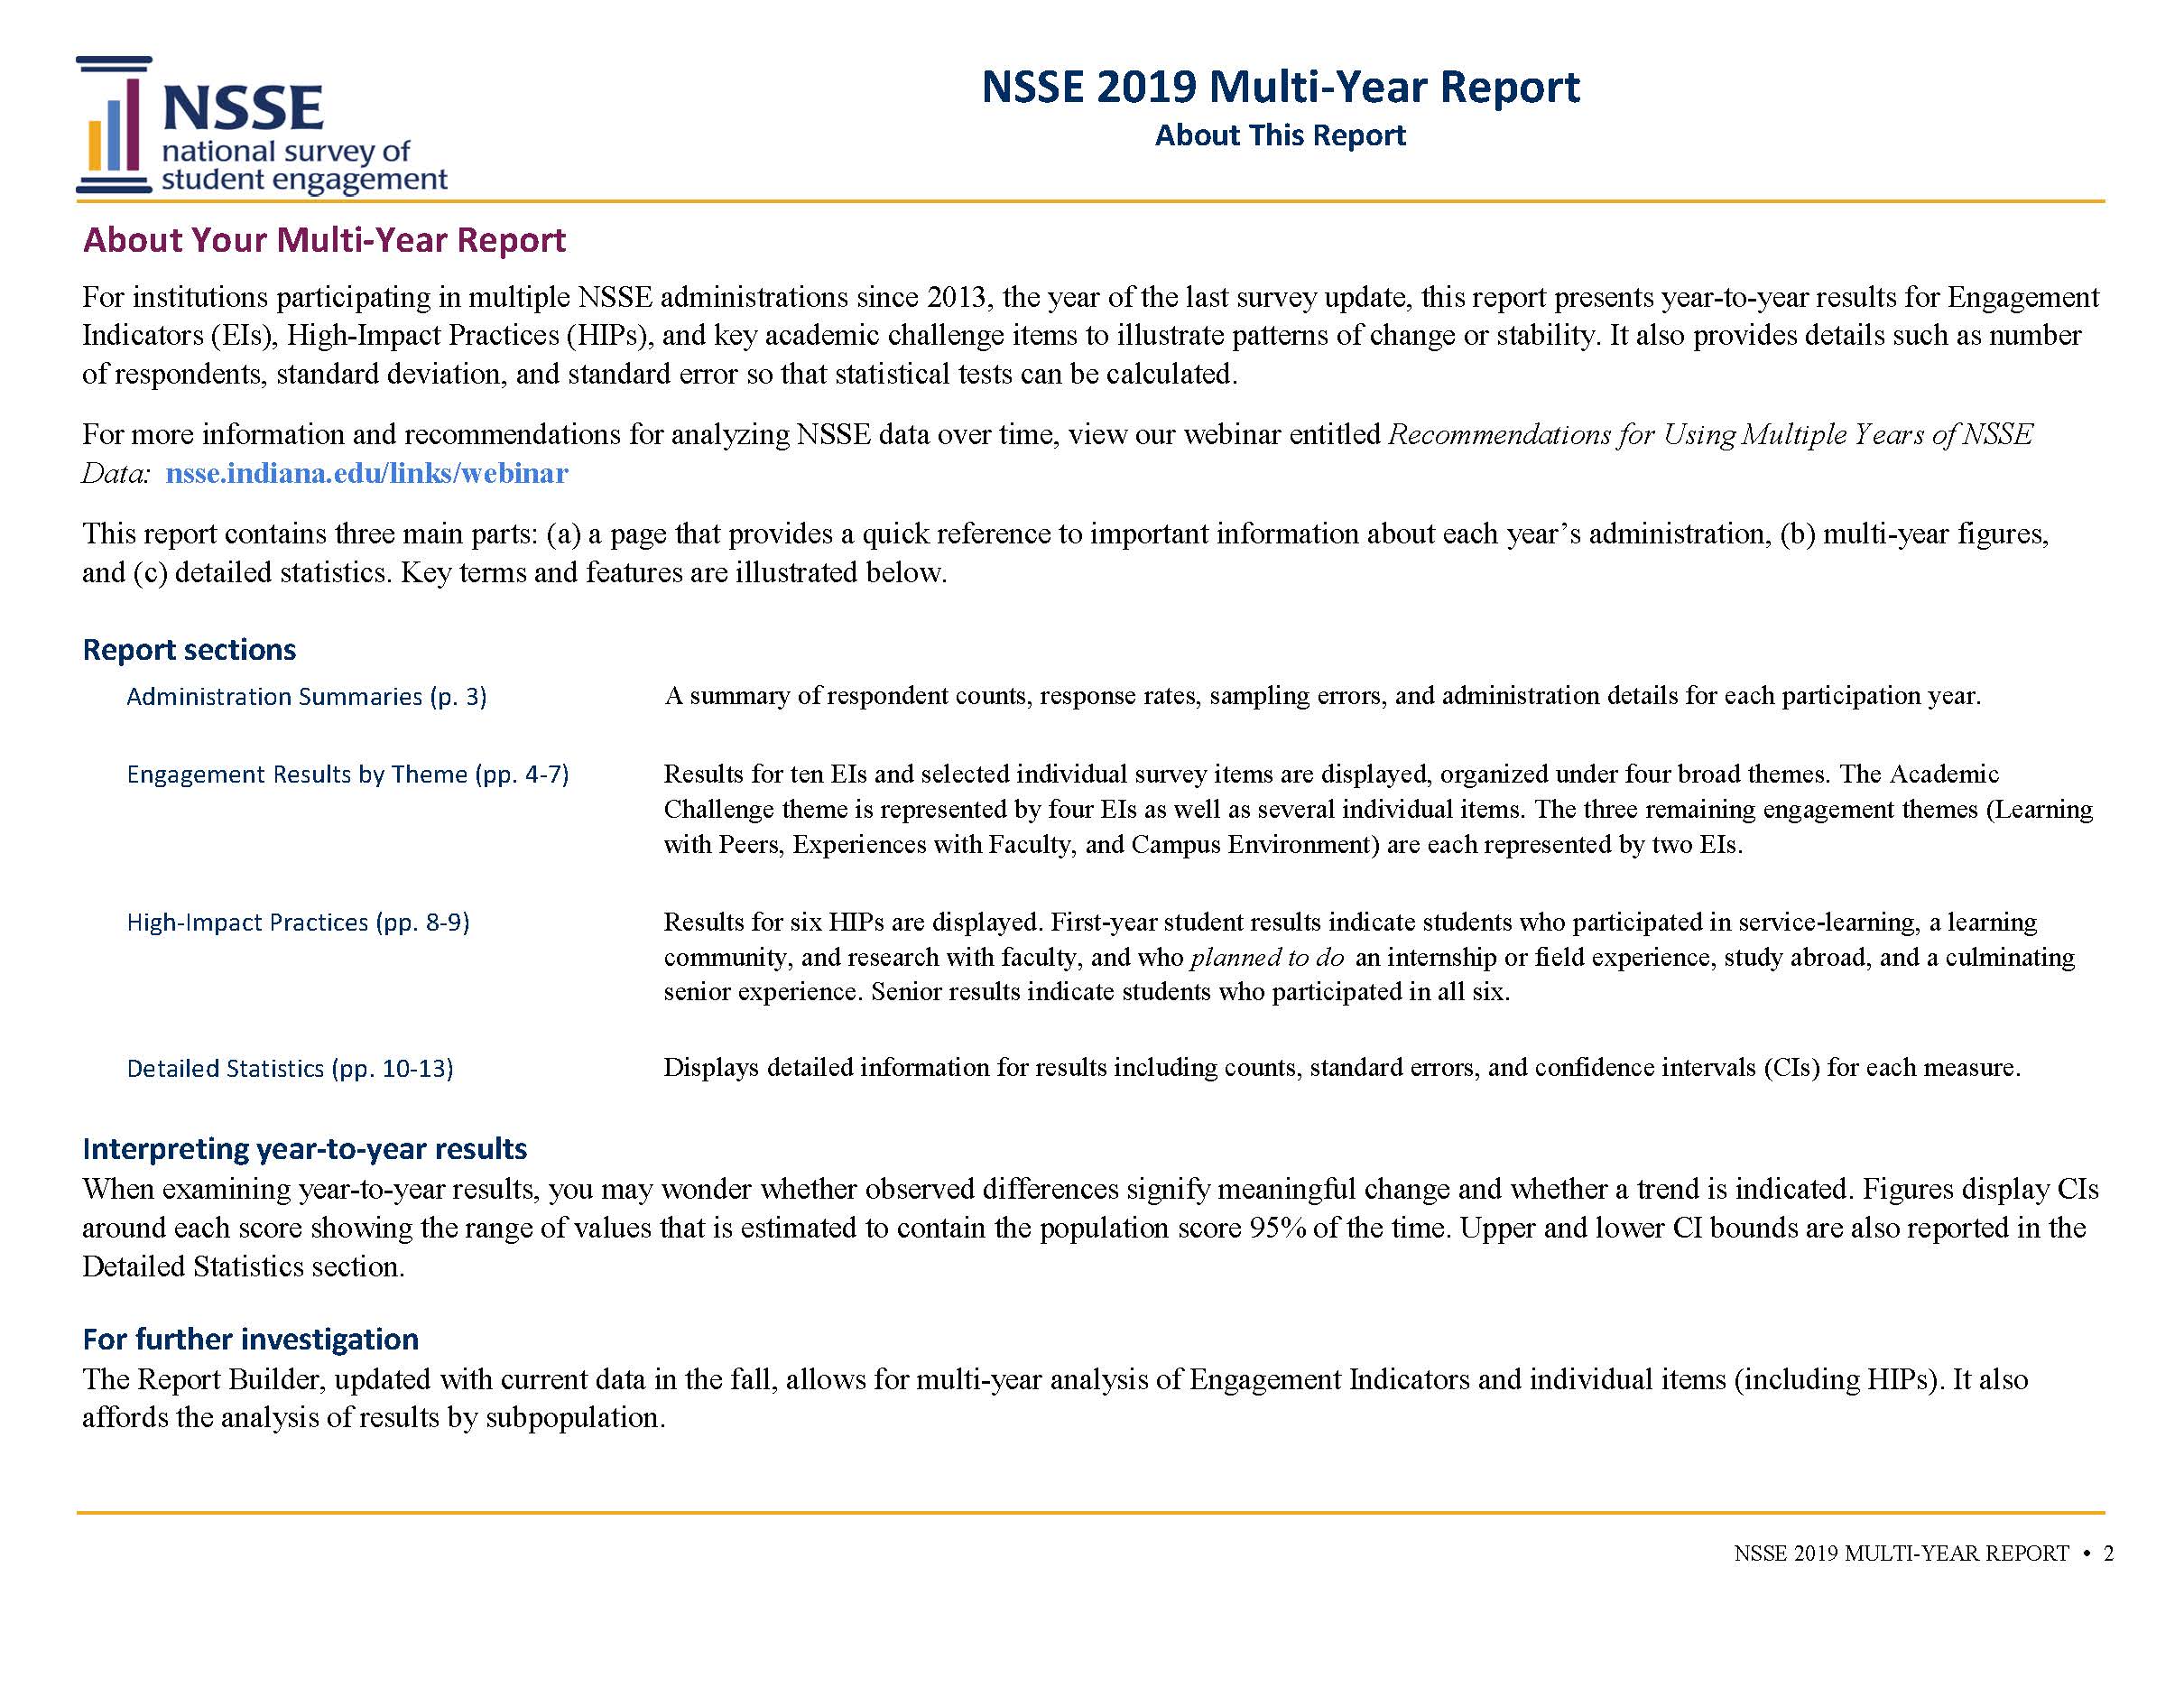 Sample Report: page 2 of NSSE Multi-Year Report